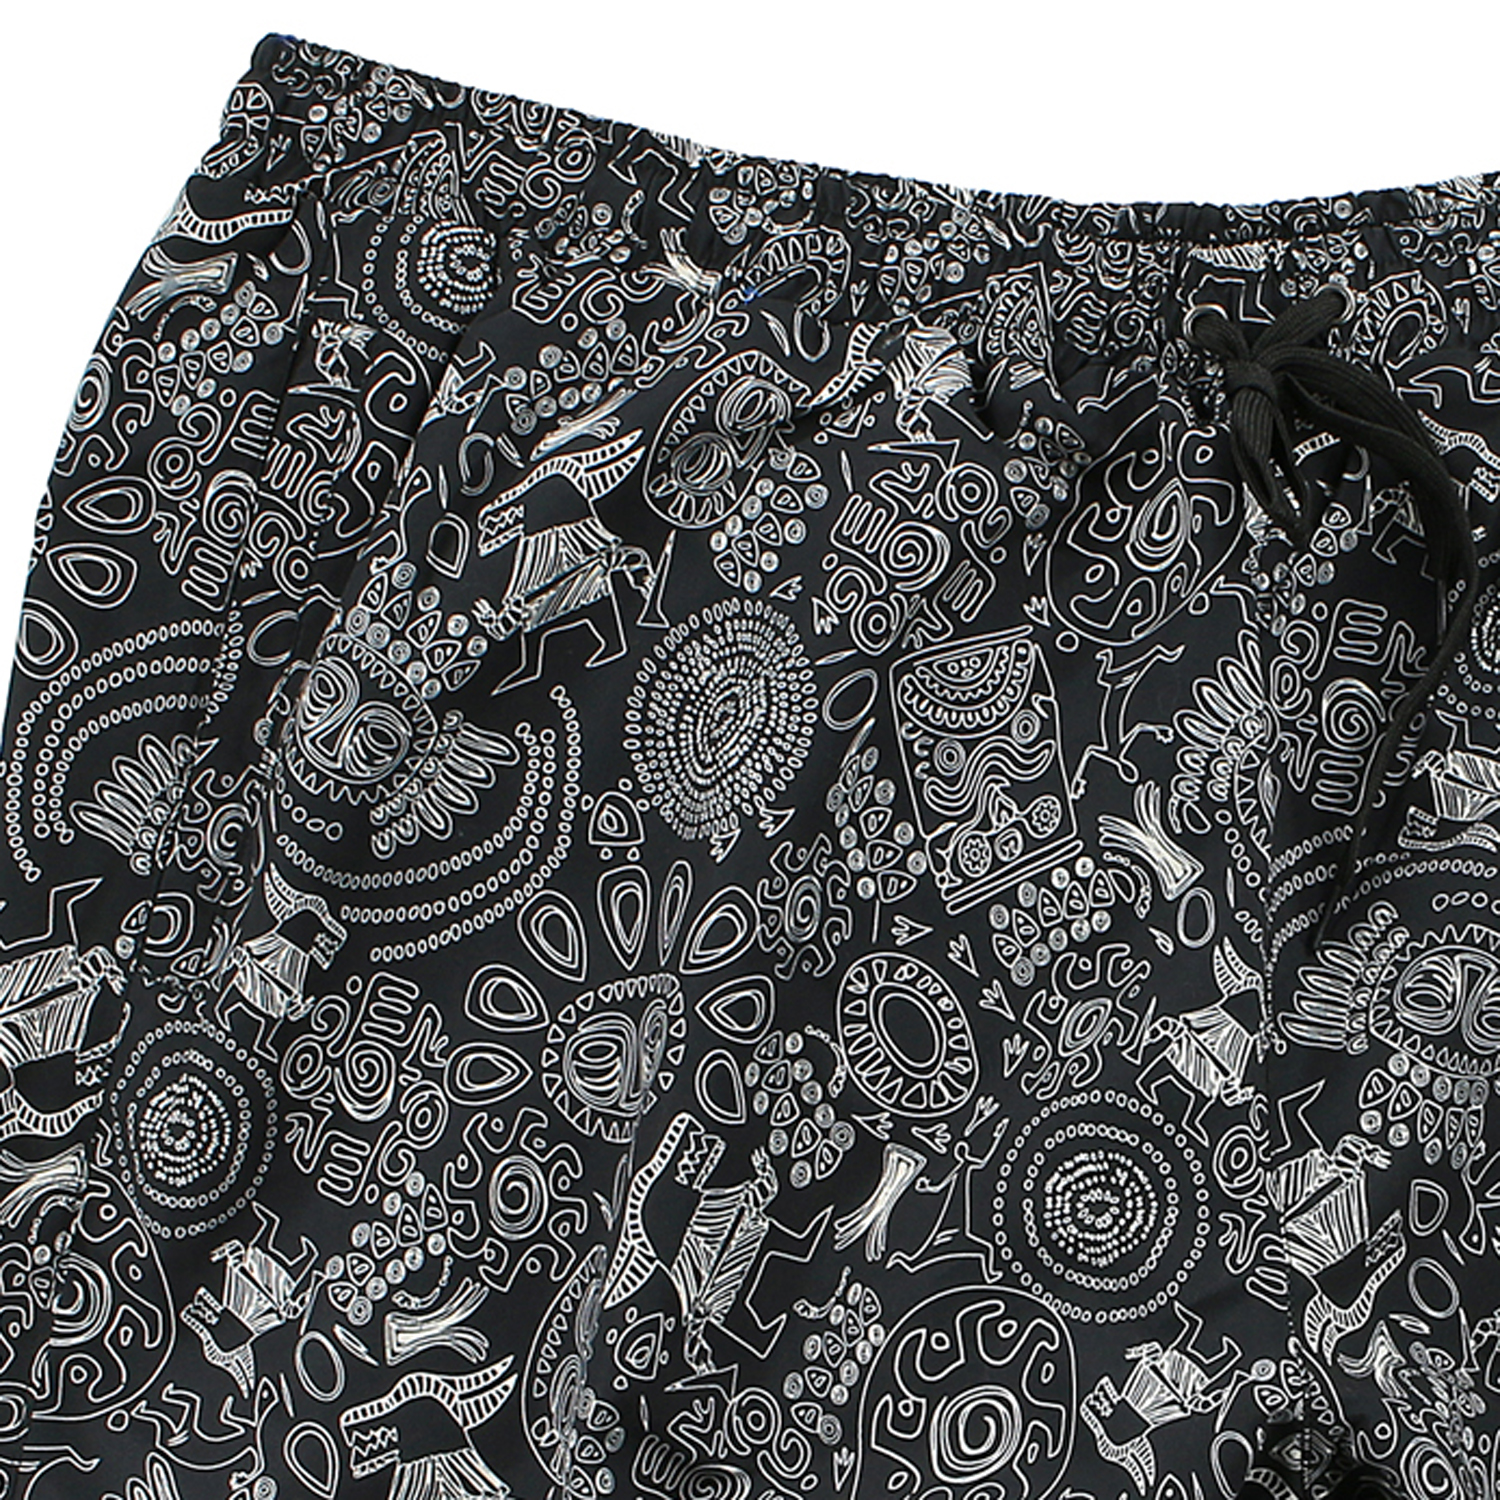 Swimming trunks in black with inka print by Abraxas up to oversize 10XL